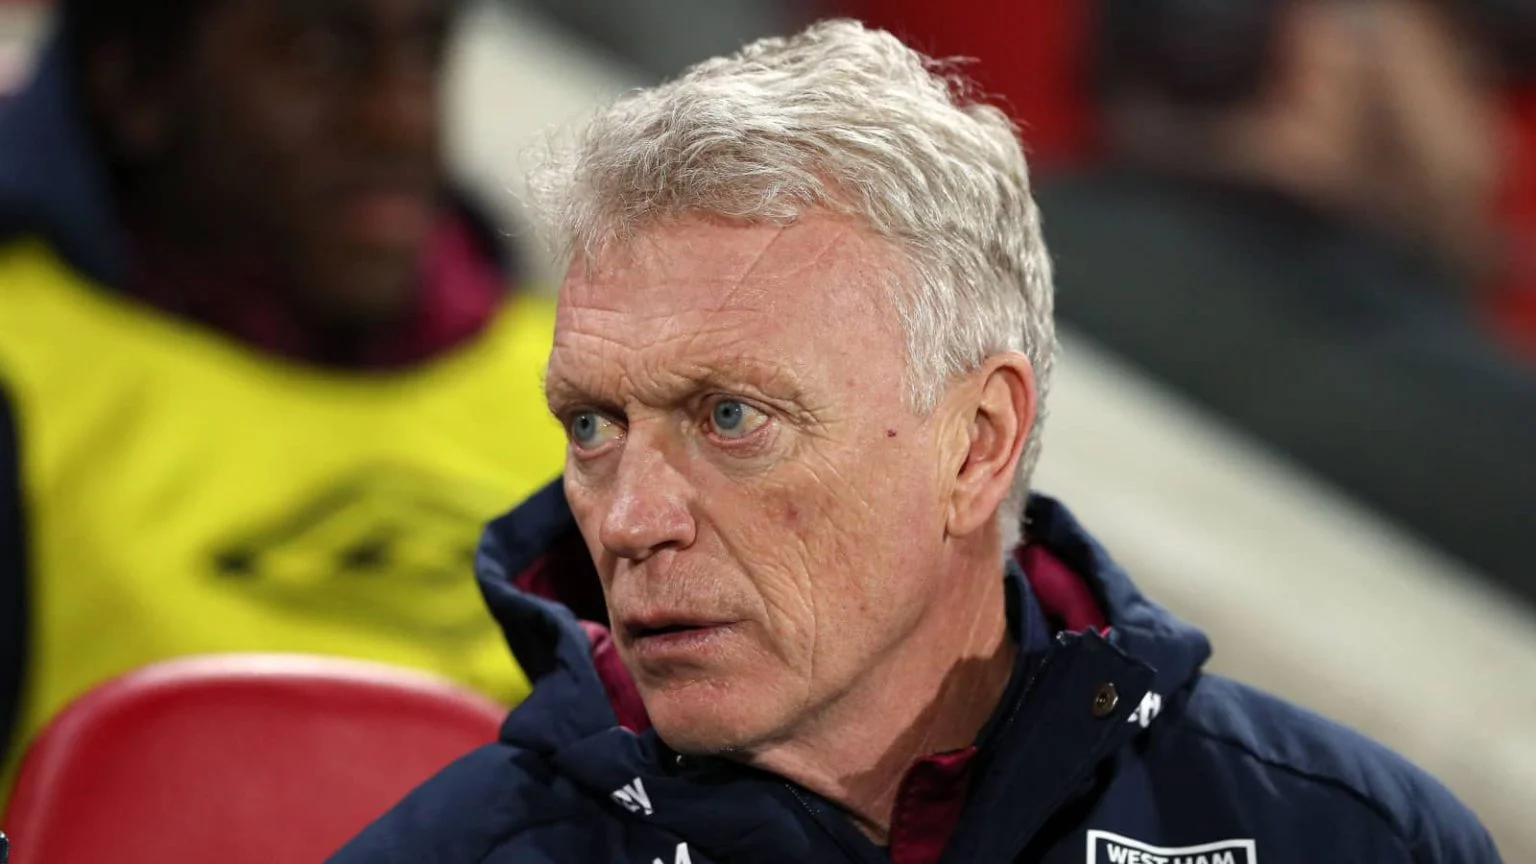 EPL: Two players responsible for West Ham’s 2-0 win over Man Utd – Moyes